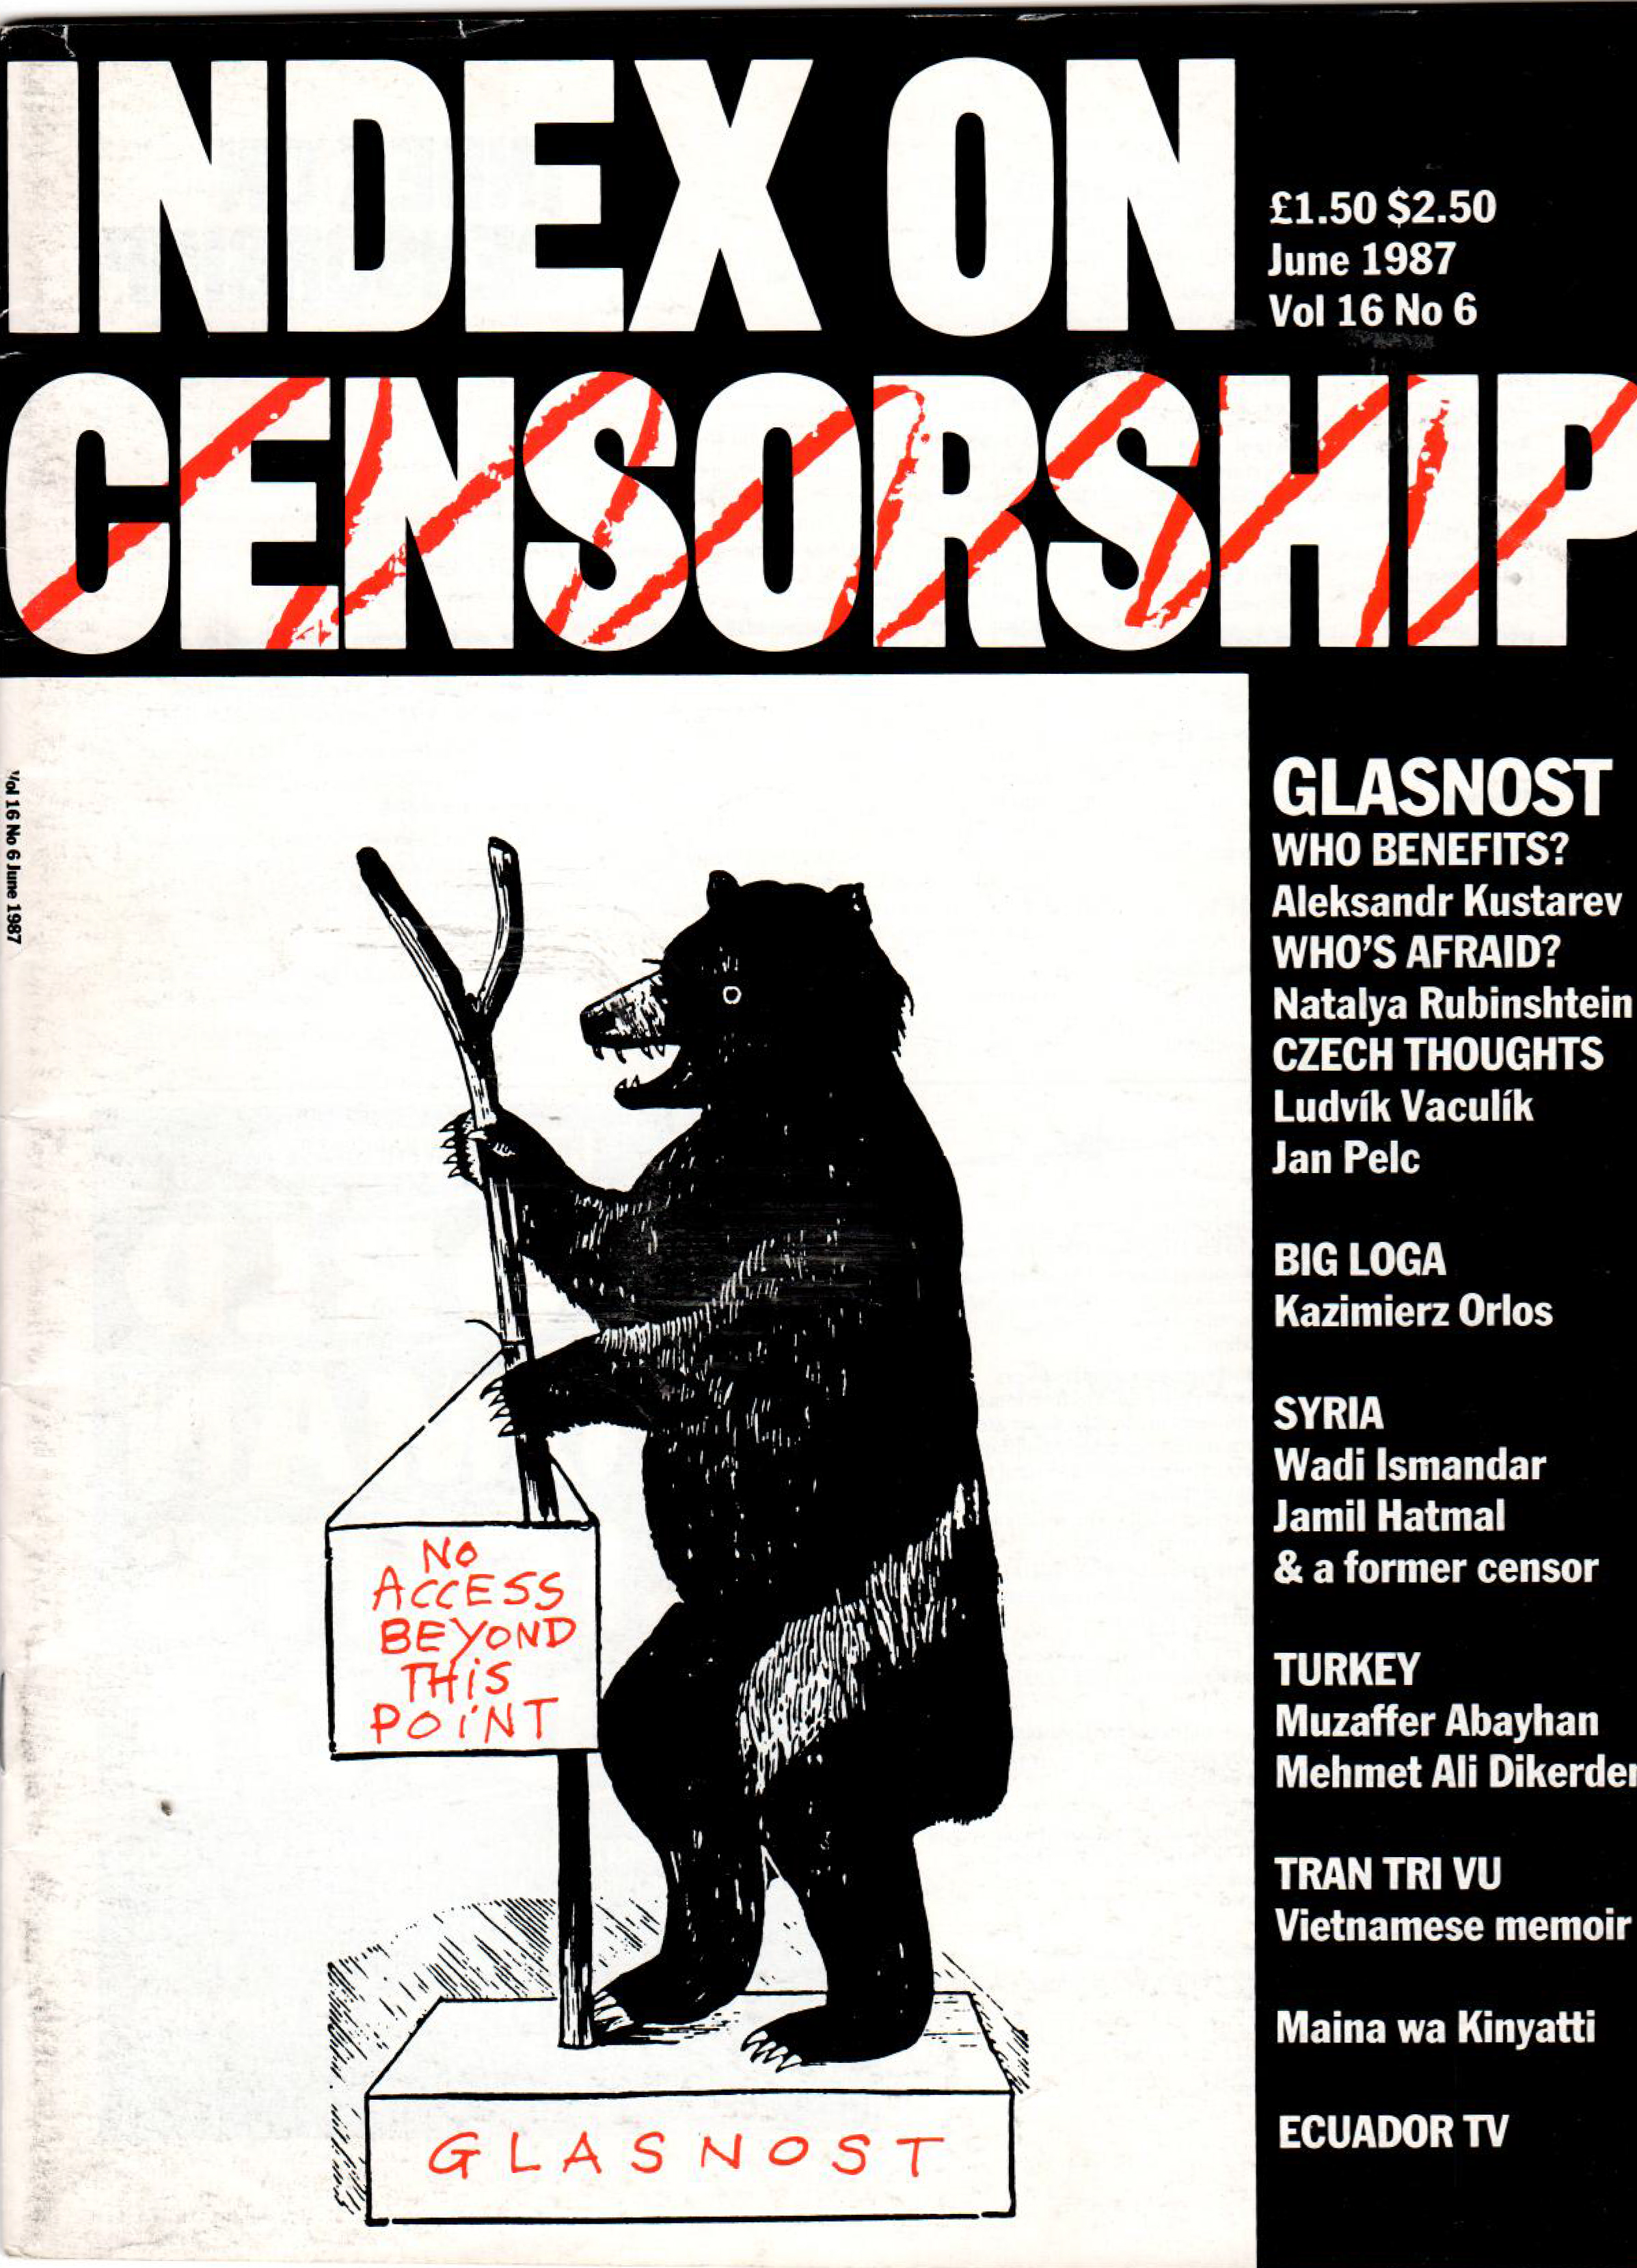 Glasnost: Who benefits?, the June 1987 issue of Index on Censorship magazine.